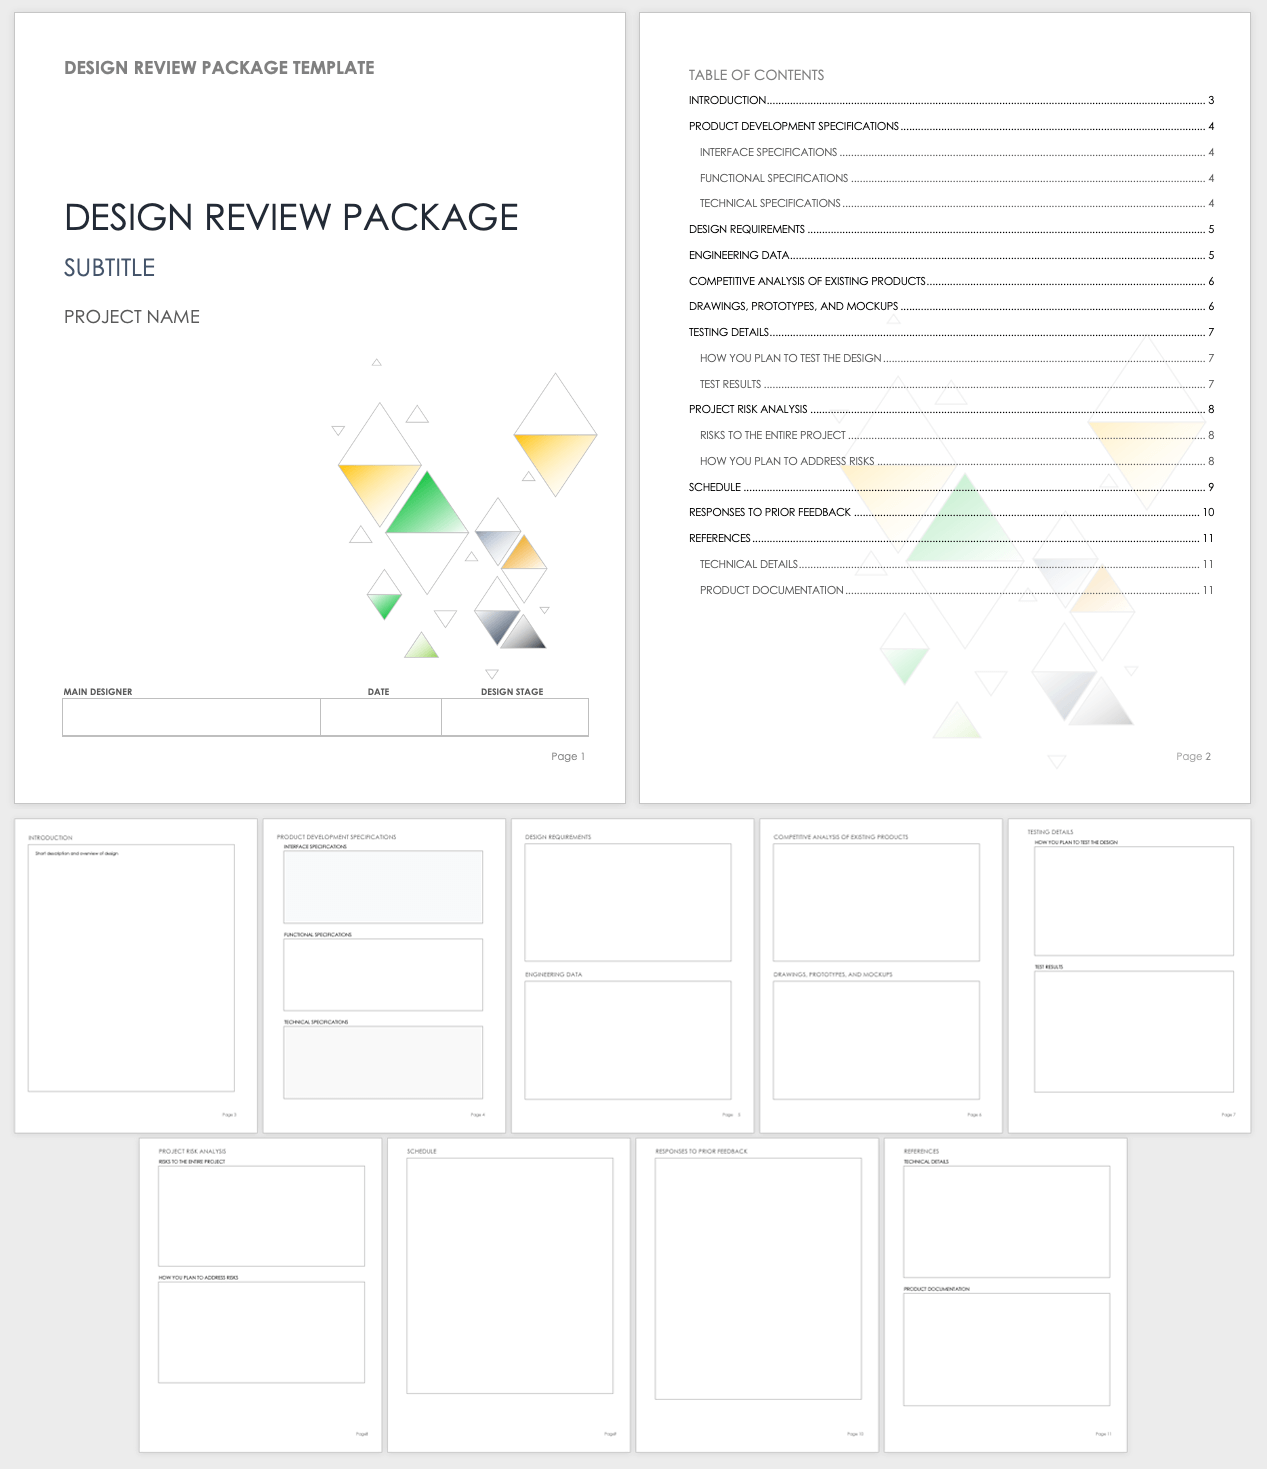 Design Review Package Template